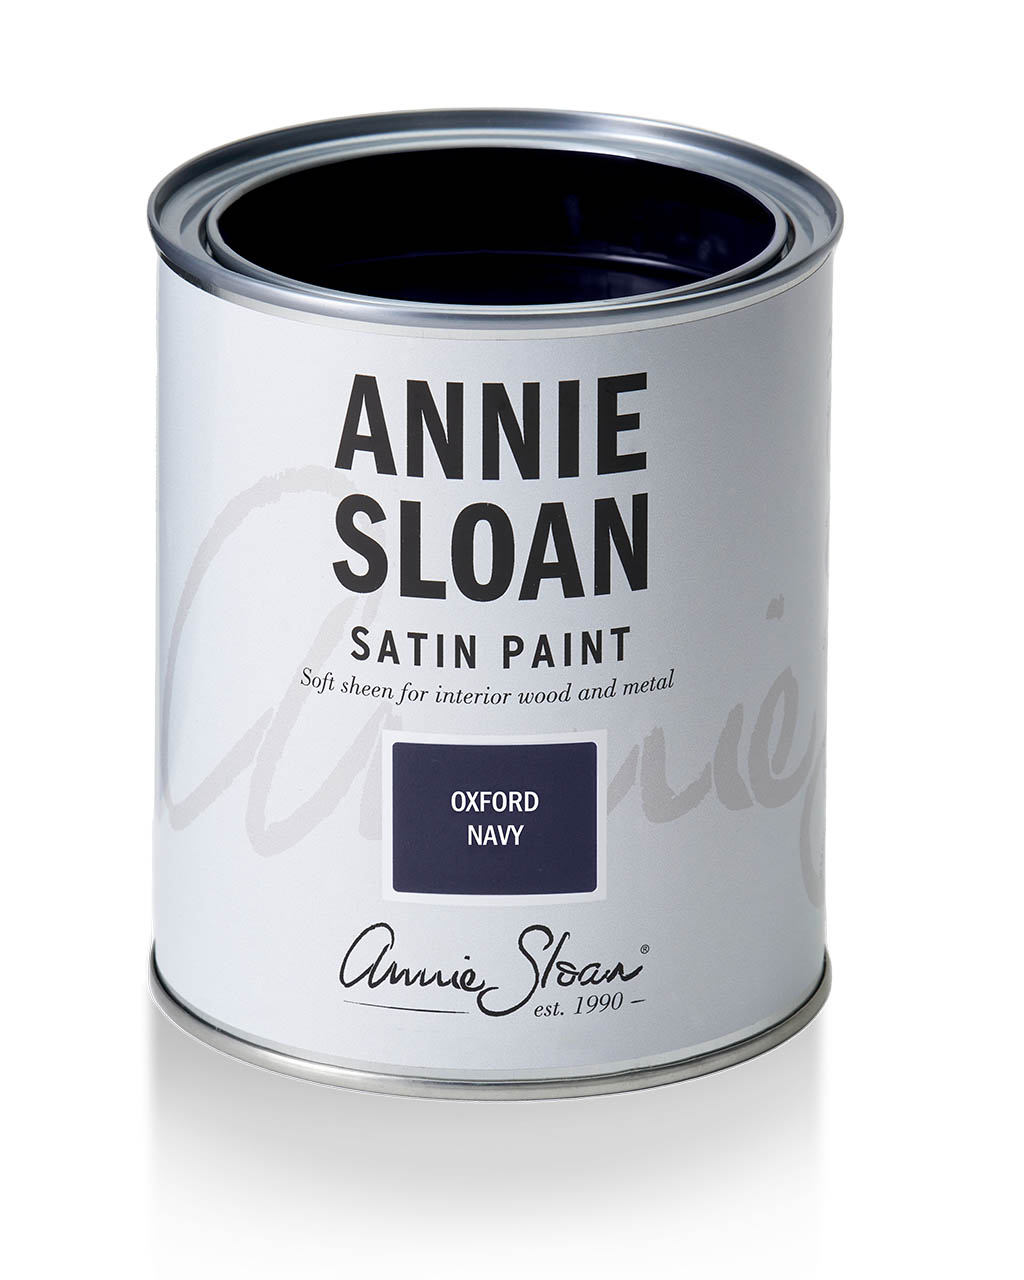 Oxford Navy Satin Paint by Annie Sloan - tin shot